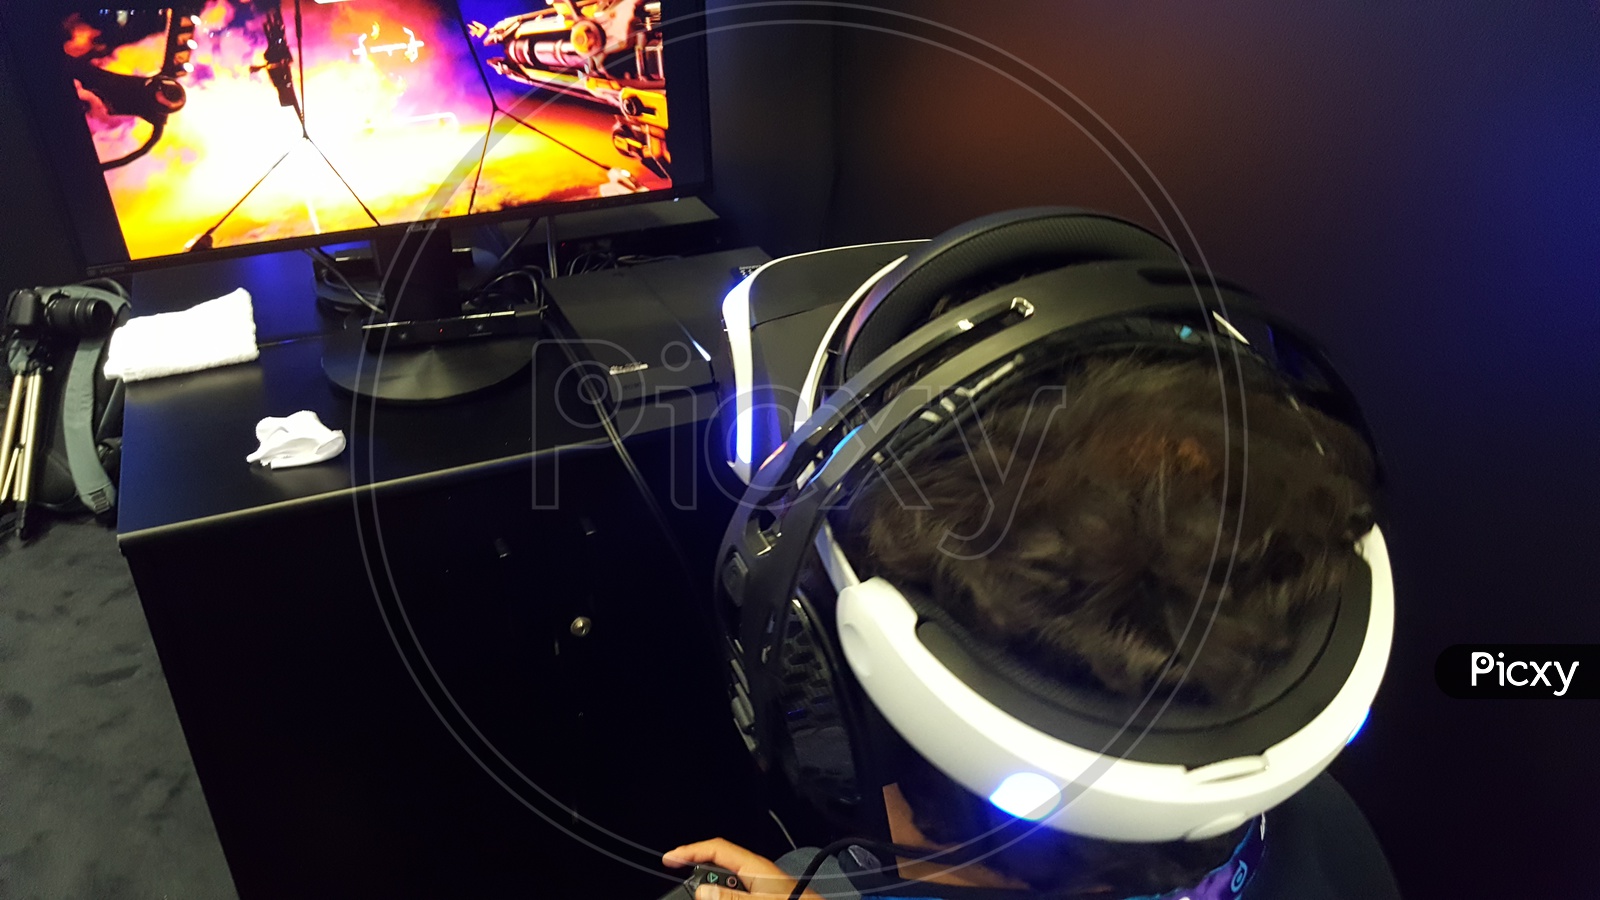 Gamer's using PlayStation Virtual Reality PSVR Headsets for Playing Games